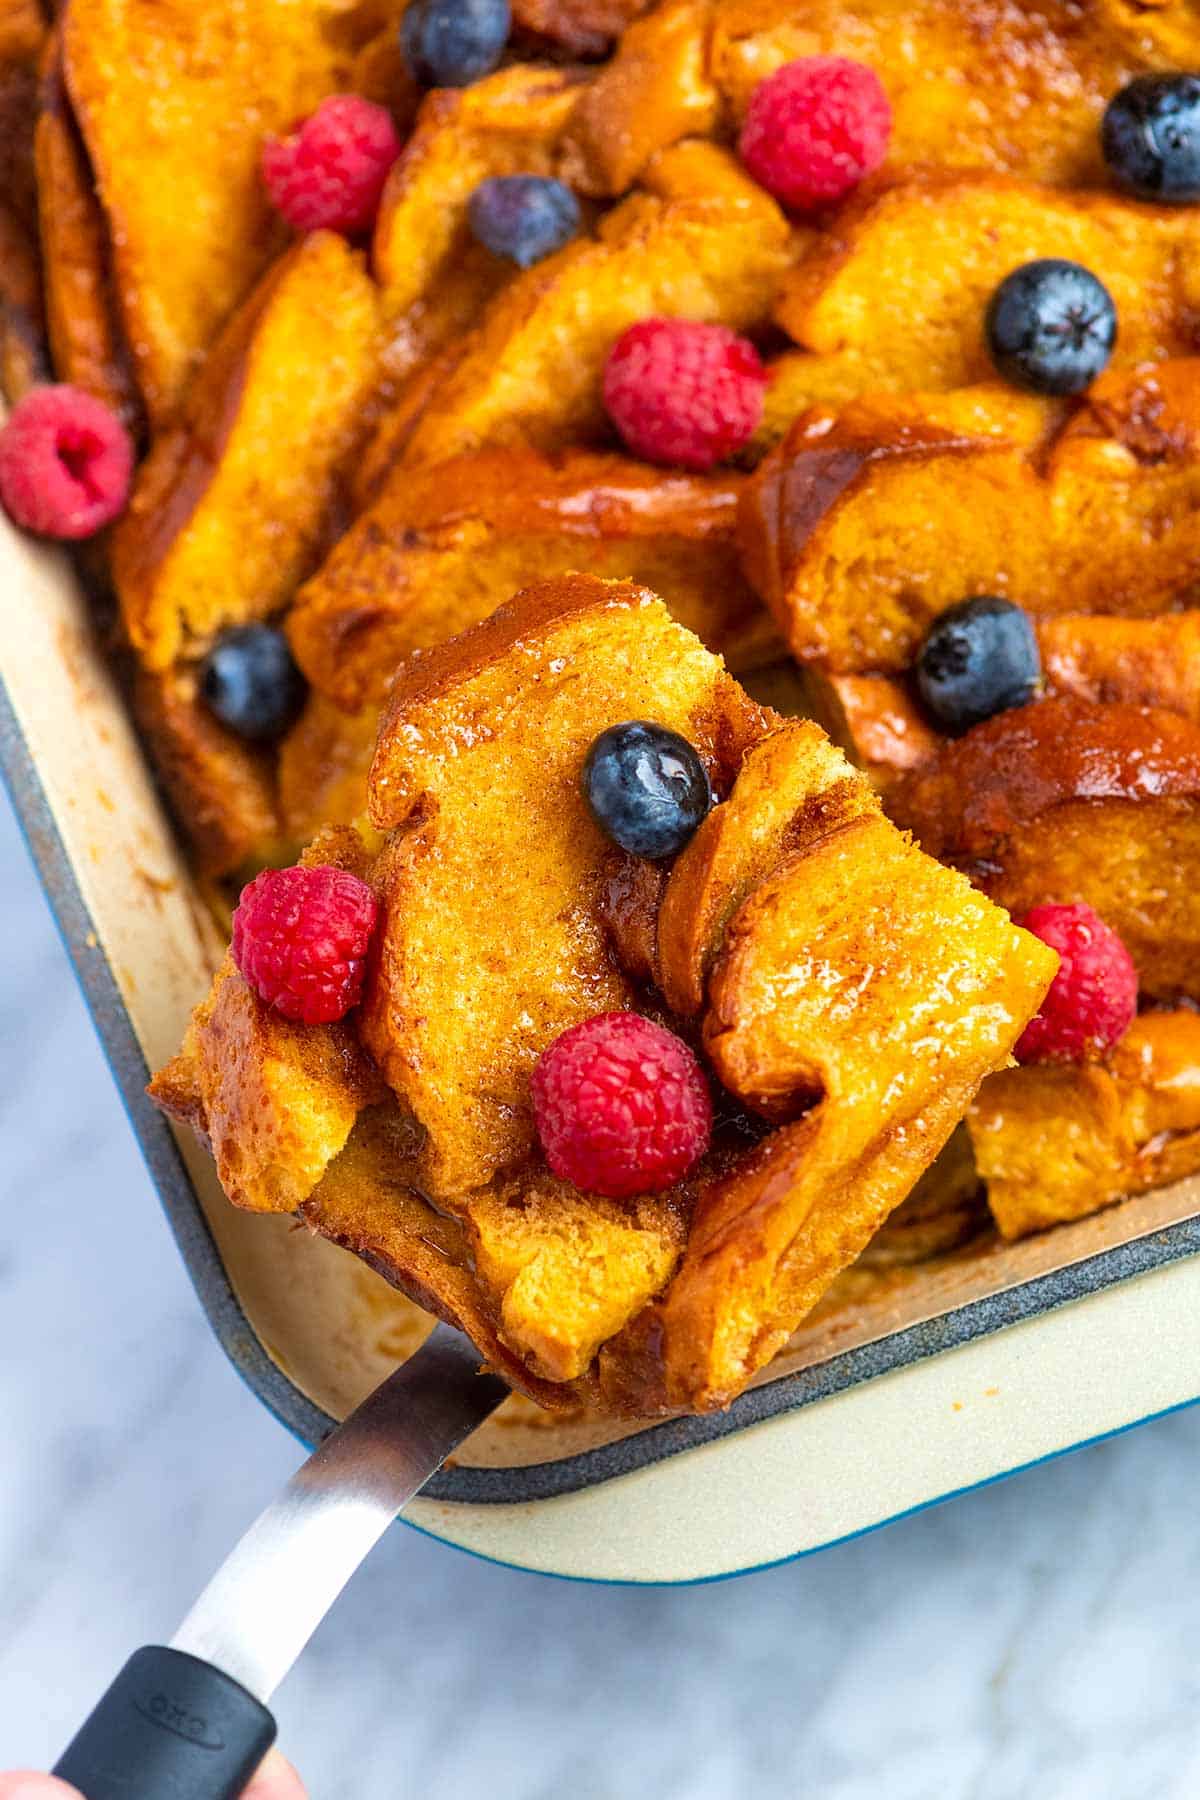 This easy baked French toast casserole is lightly spiced, slightly sweet, perfectly soft in the middle, and has a buttery crisp top. You can make this straight away or make it in advance -- even overnight!